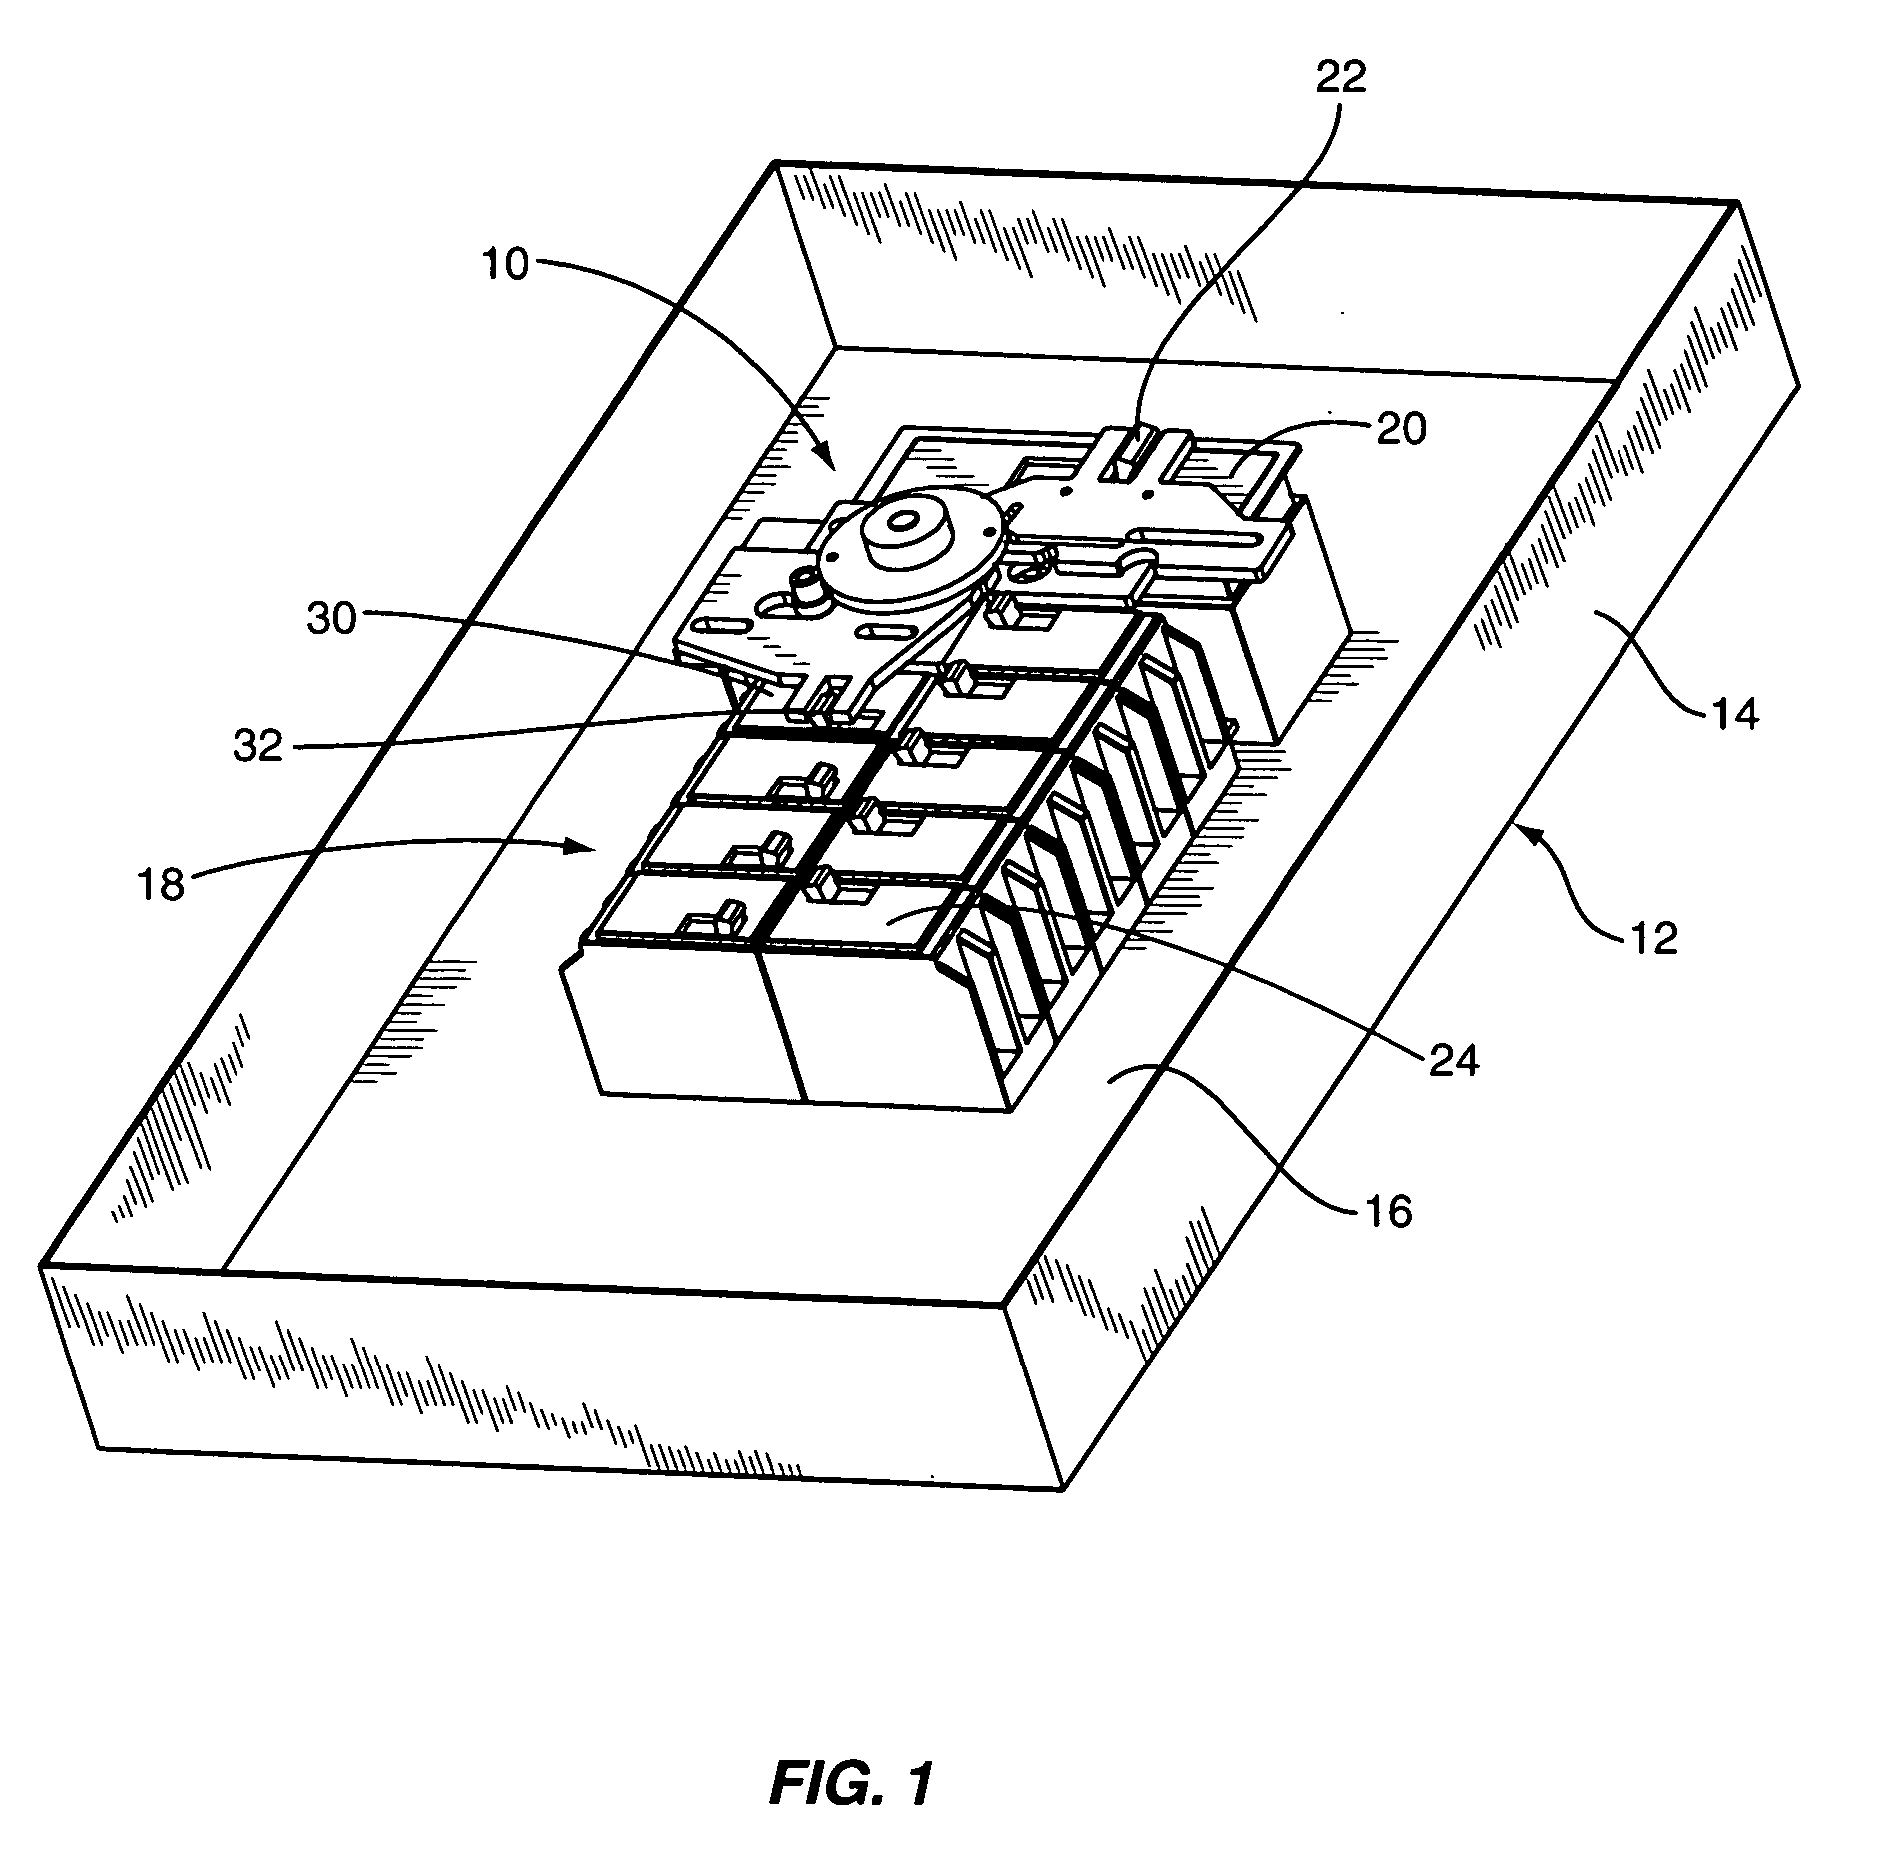 Switching mechanism with mechanical interlocking and manual override